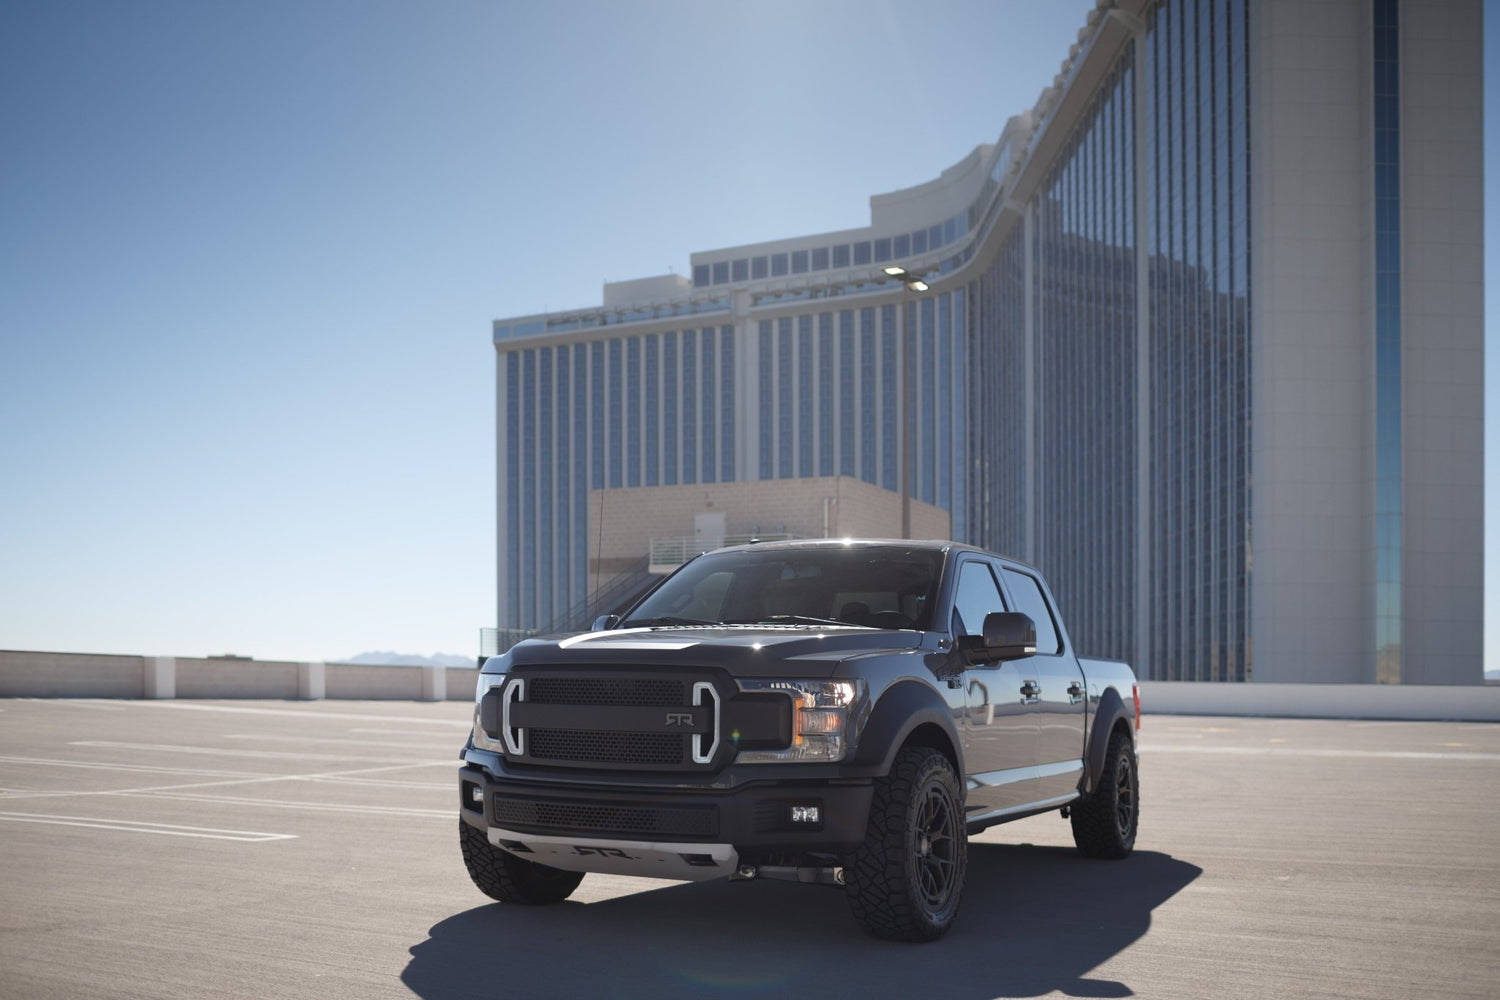 2019 Ford F-150 RTR performance pickup coming soon